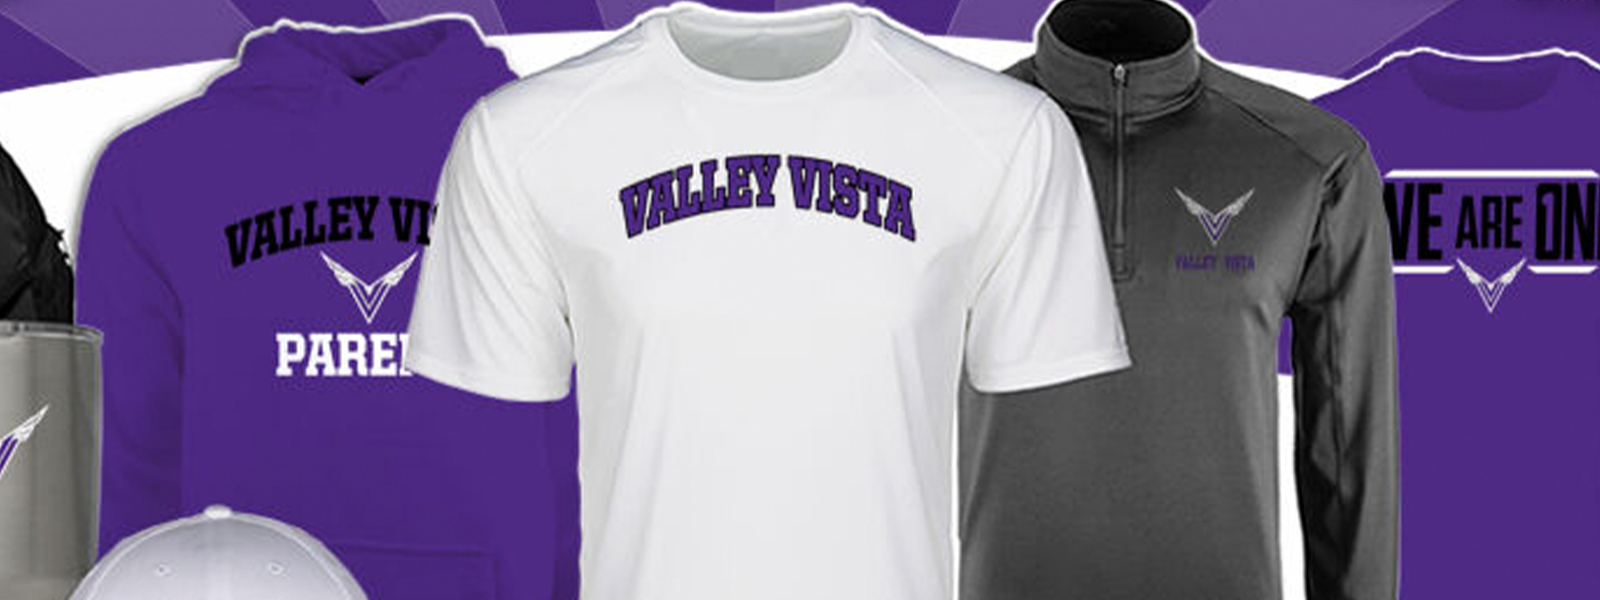 Examples of shirts and gear with valley vista logo on it from school store.